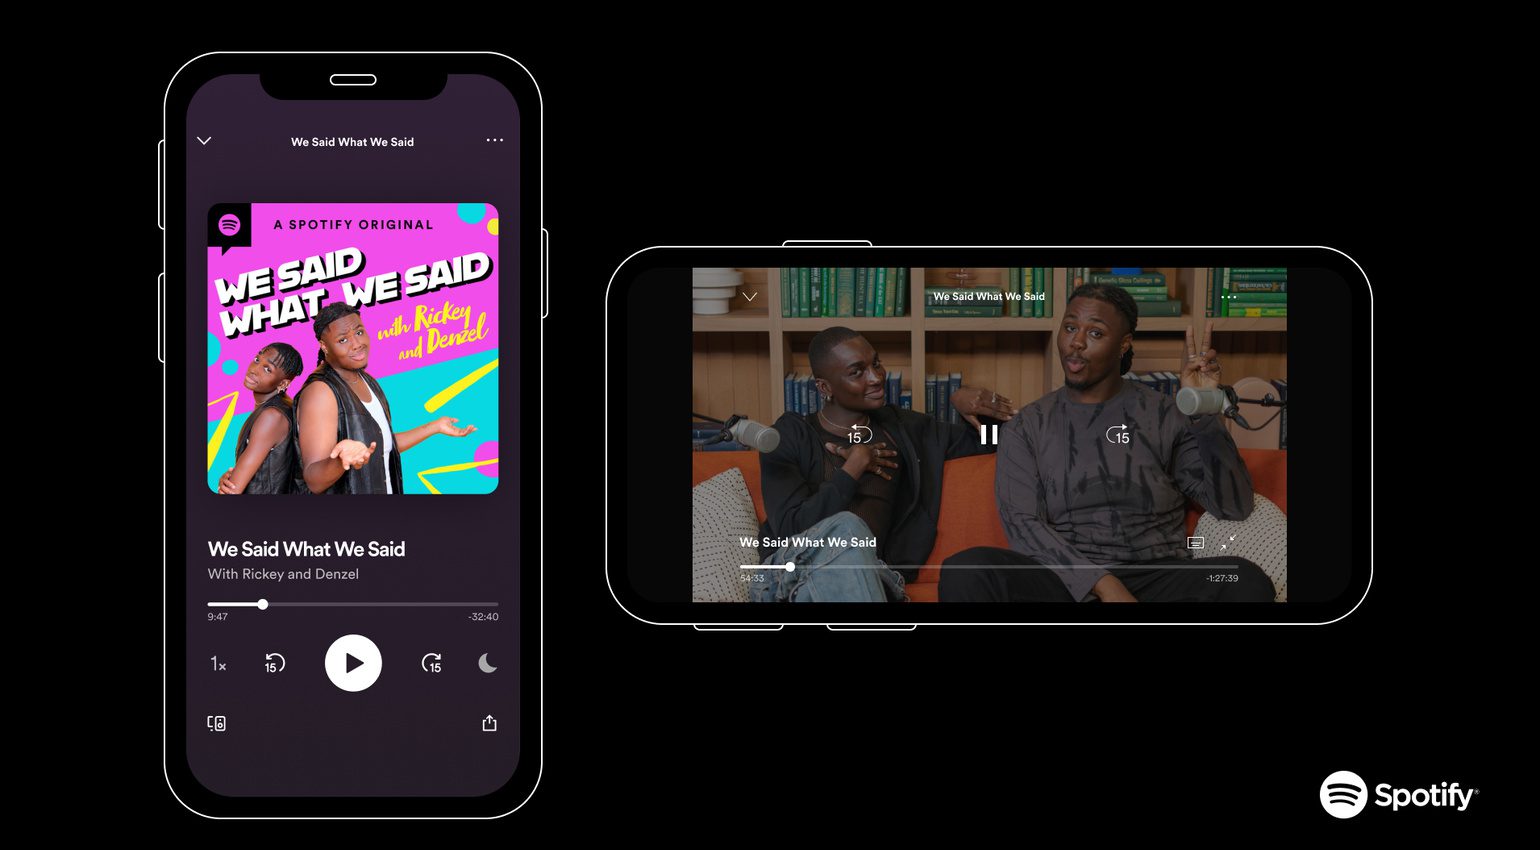 Neu bei Spotify: Video Podcasts, In-App Produktion und Heardle!